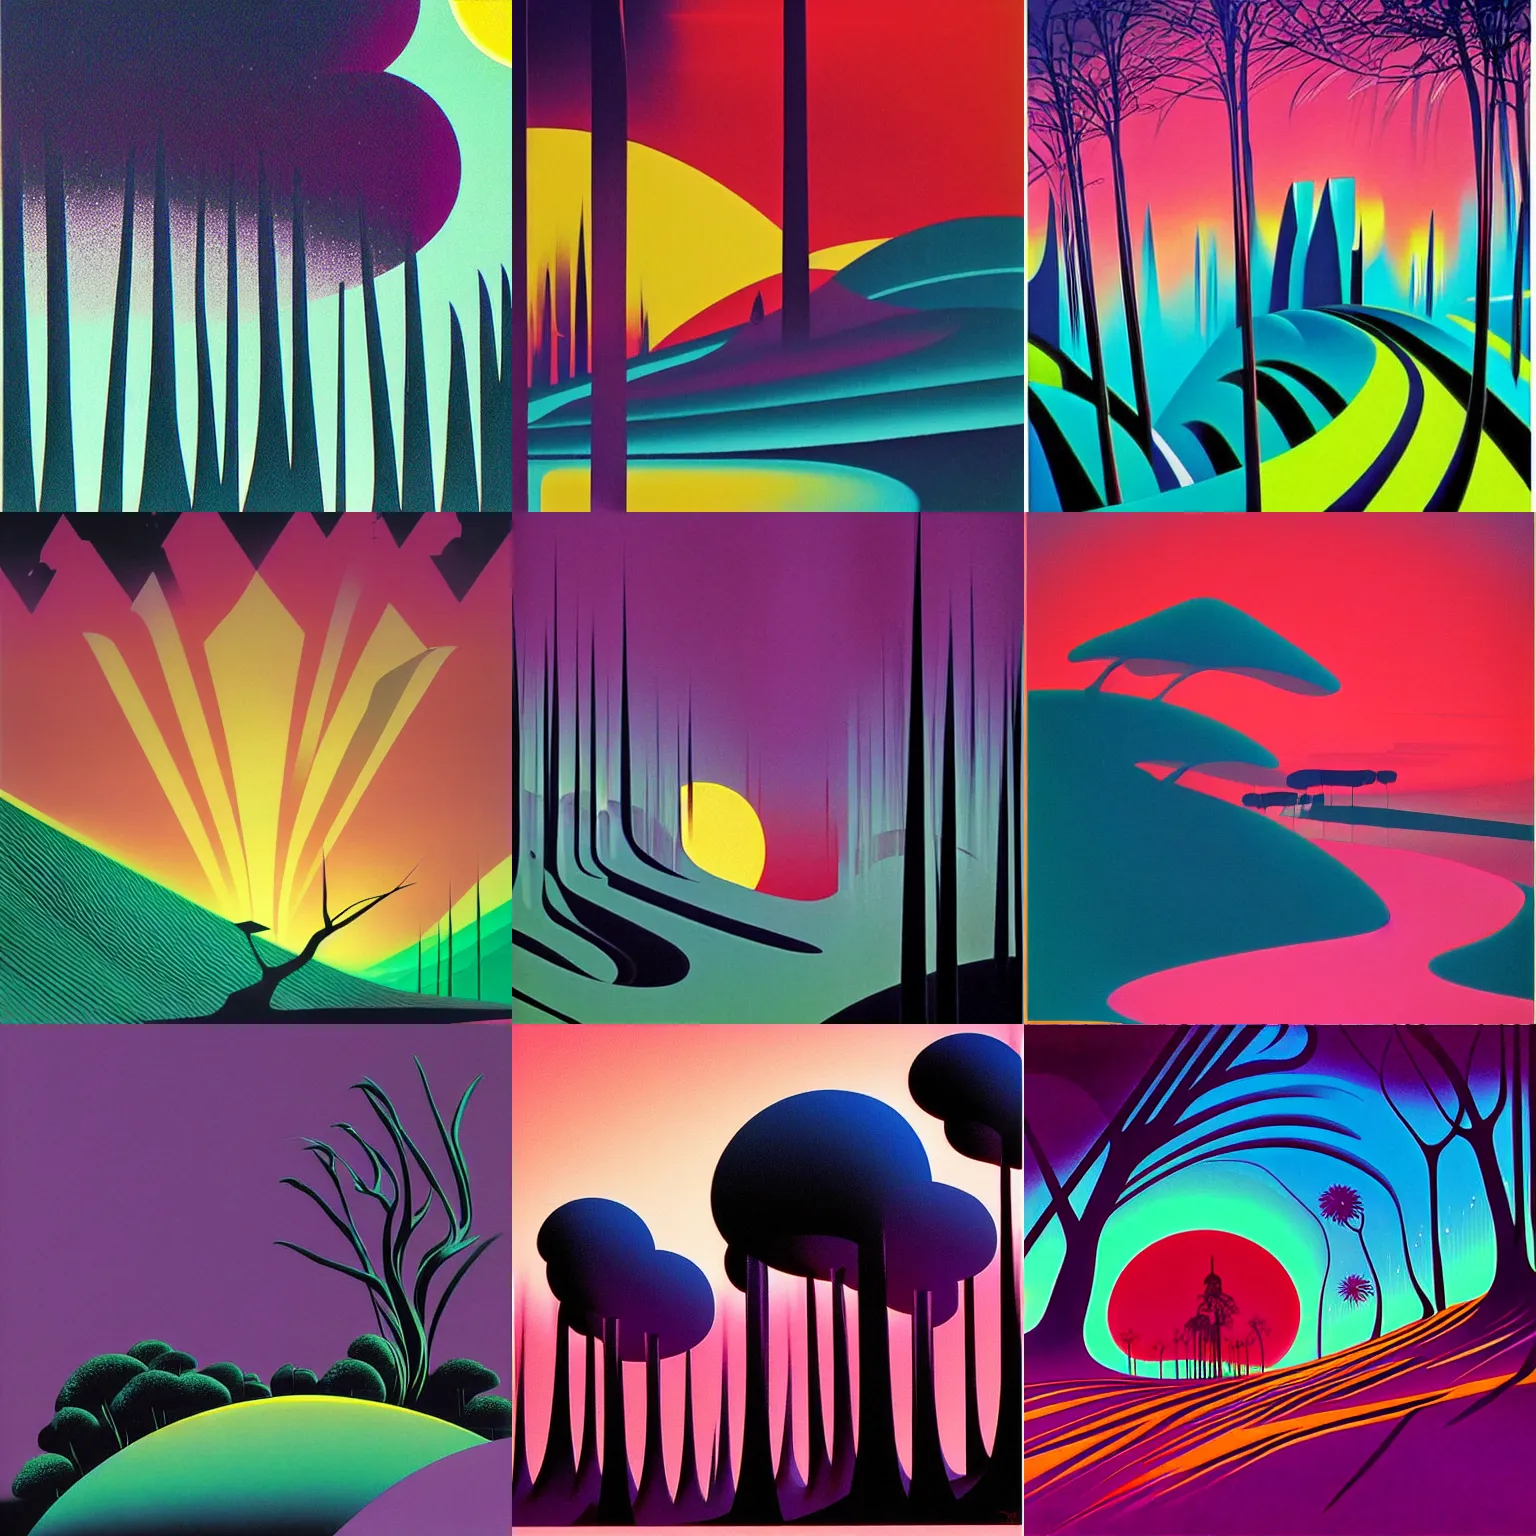 Prompt: synthwave, by eyvind earle